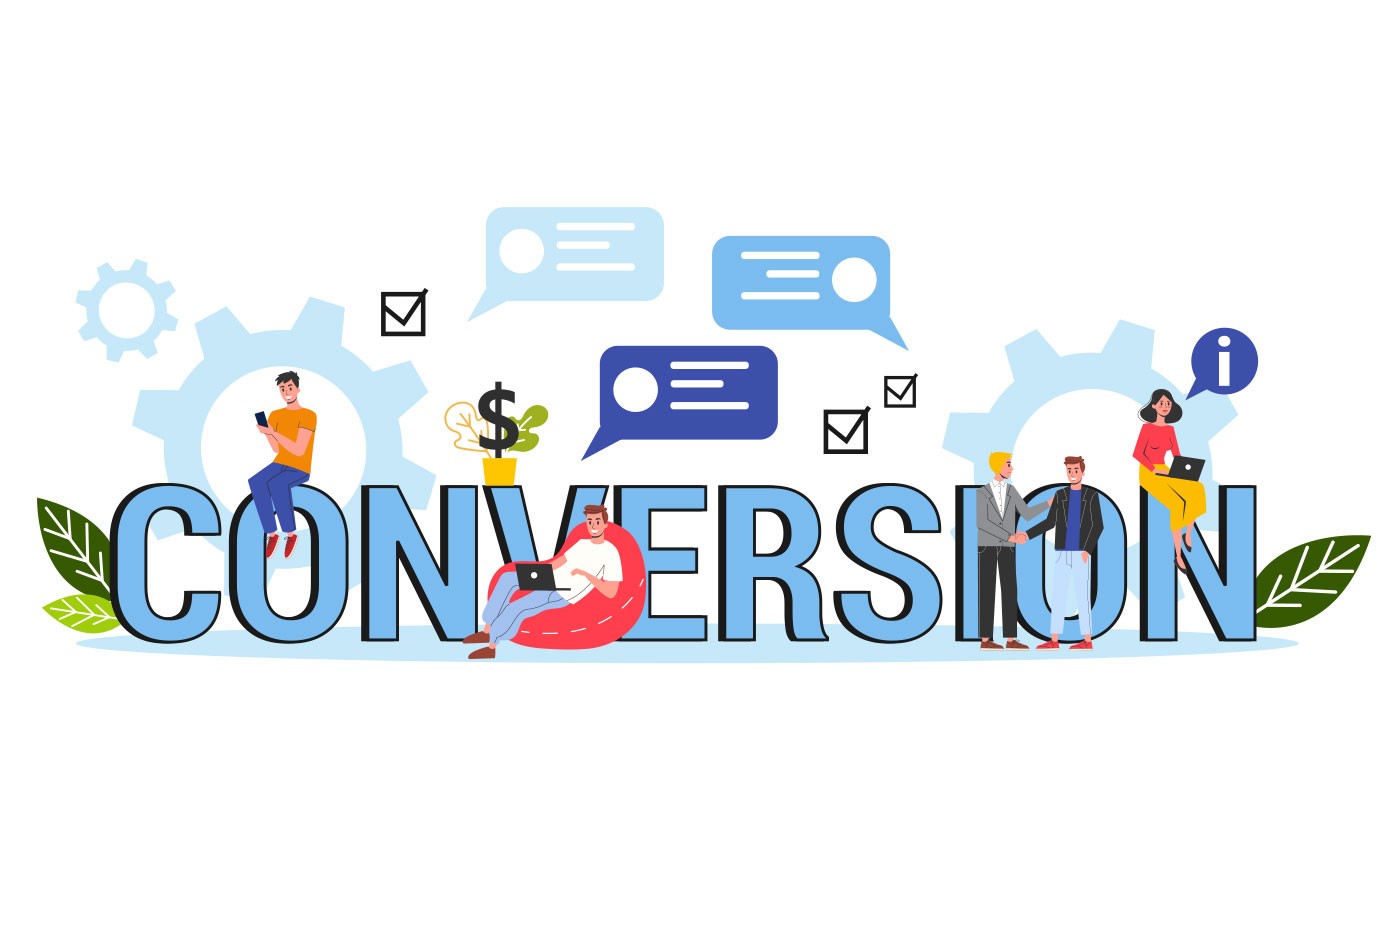 How To Get More Website Conversions Fast